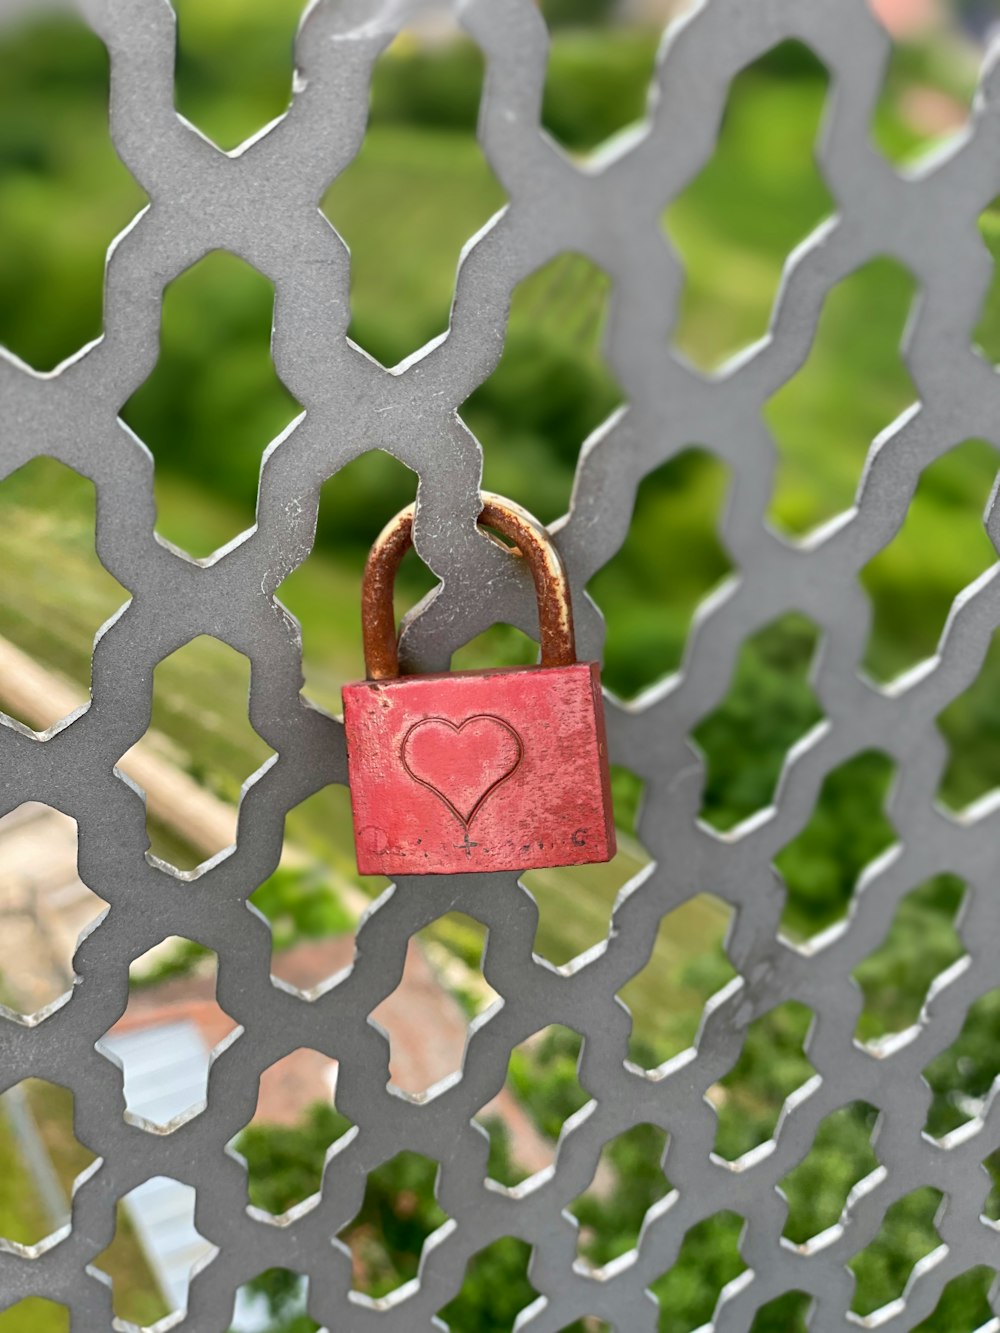 red padlock on chain link fence